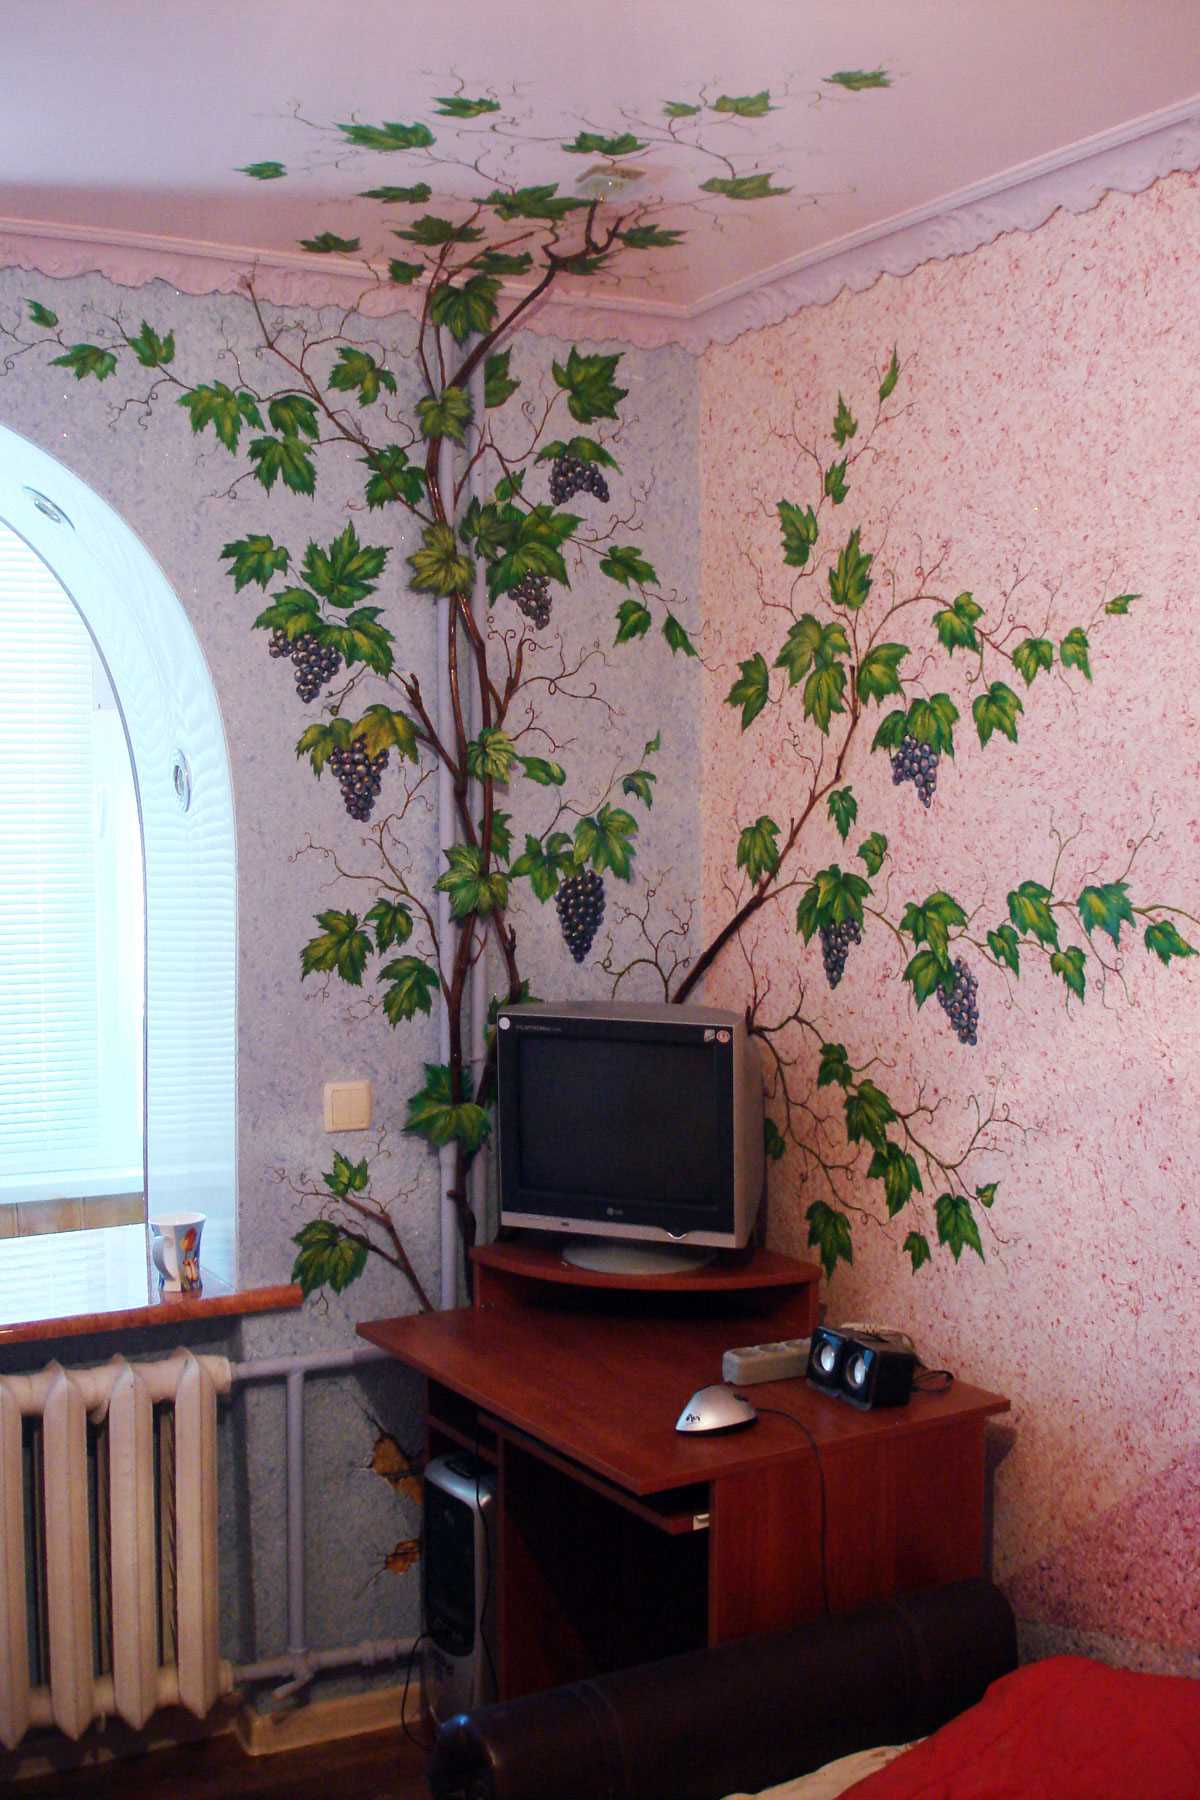 variant of the beautiful interior of the apartment with a decorative pattern on the wall